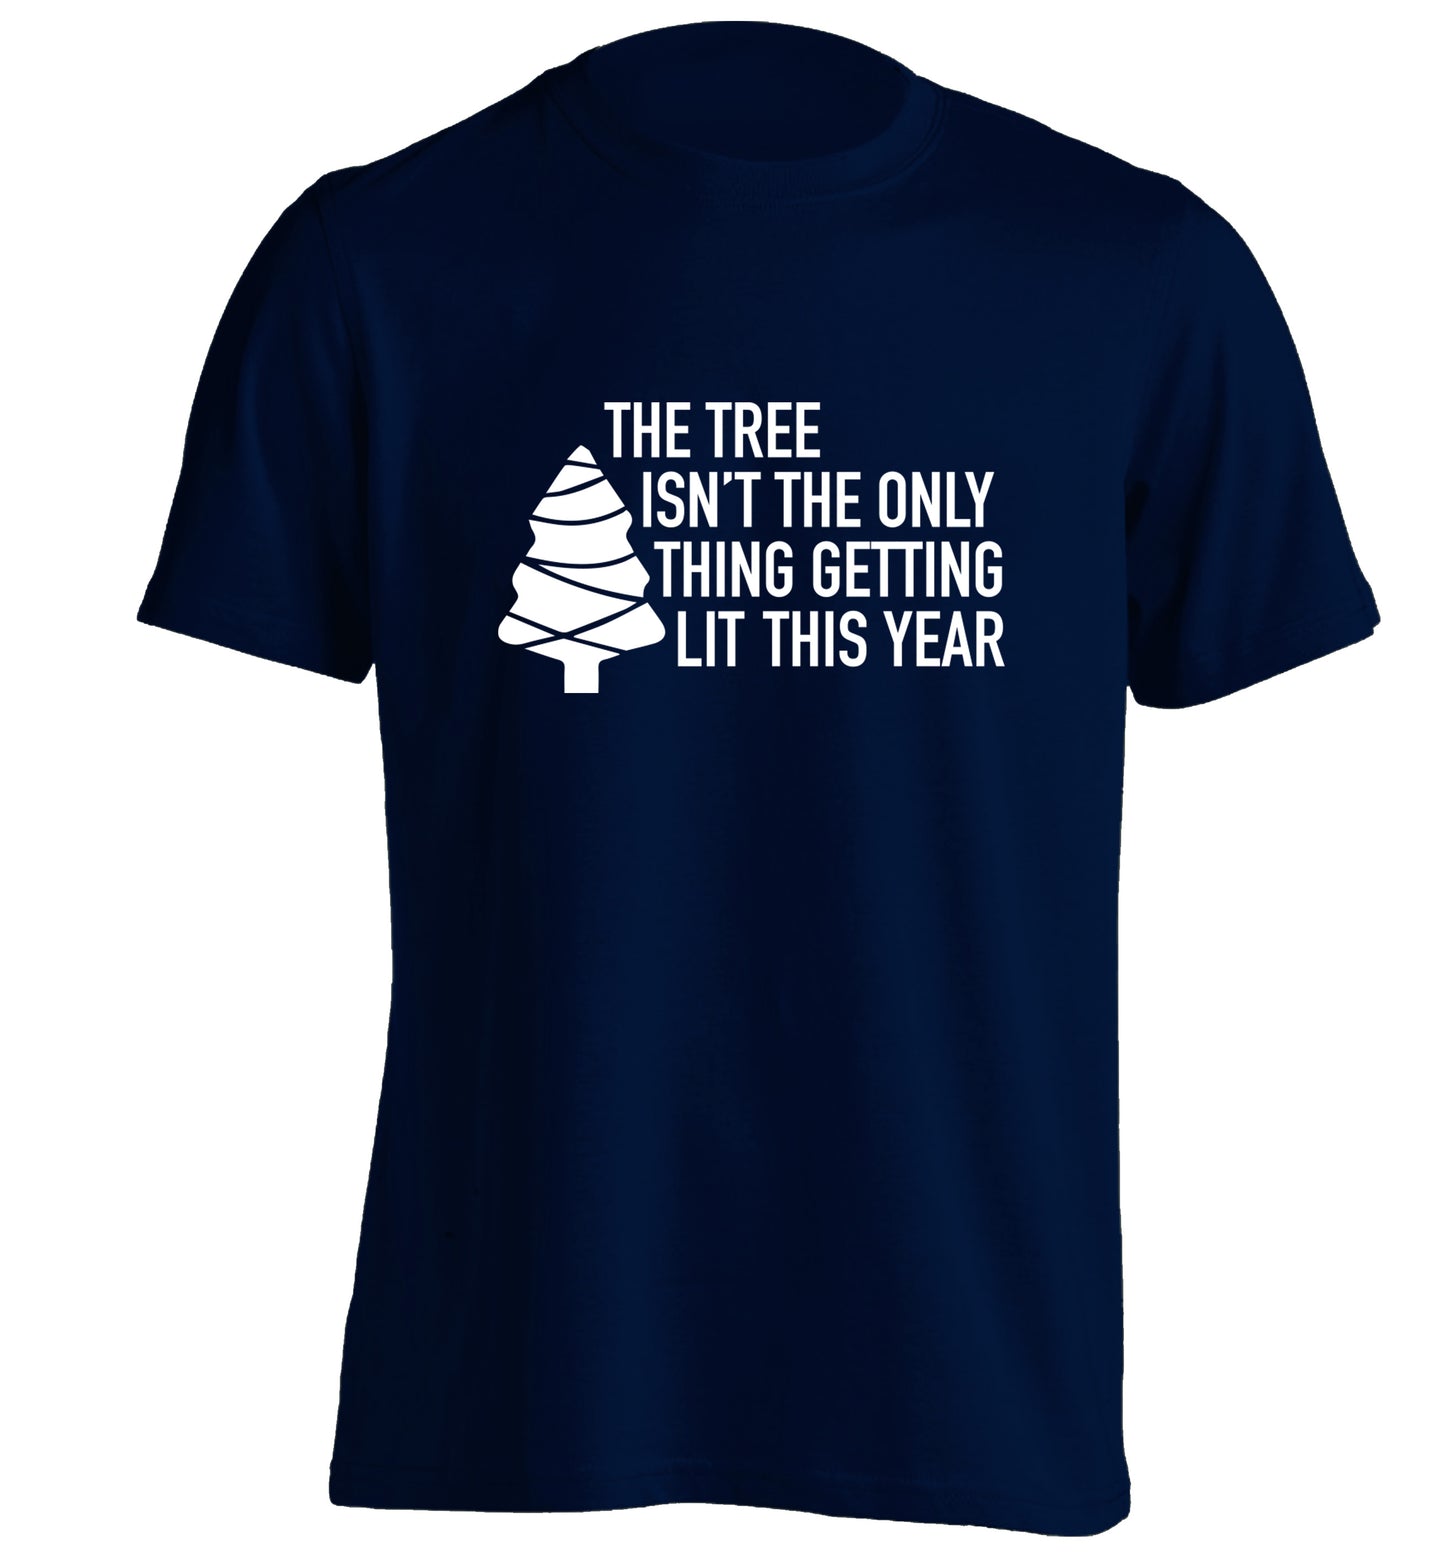 The tree isn't the only thing getting lit this year adults unisex navy Tshirt 2XL